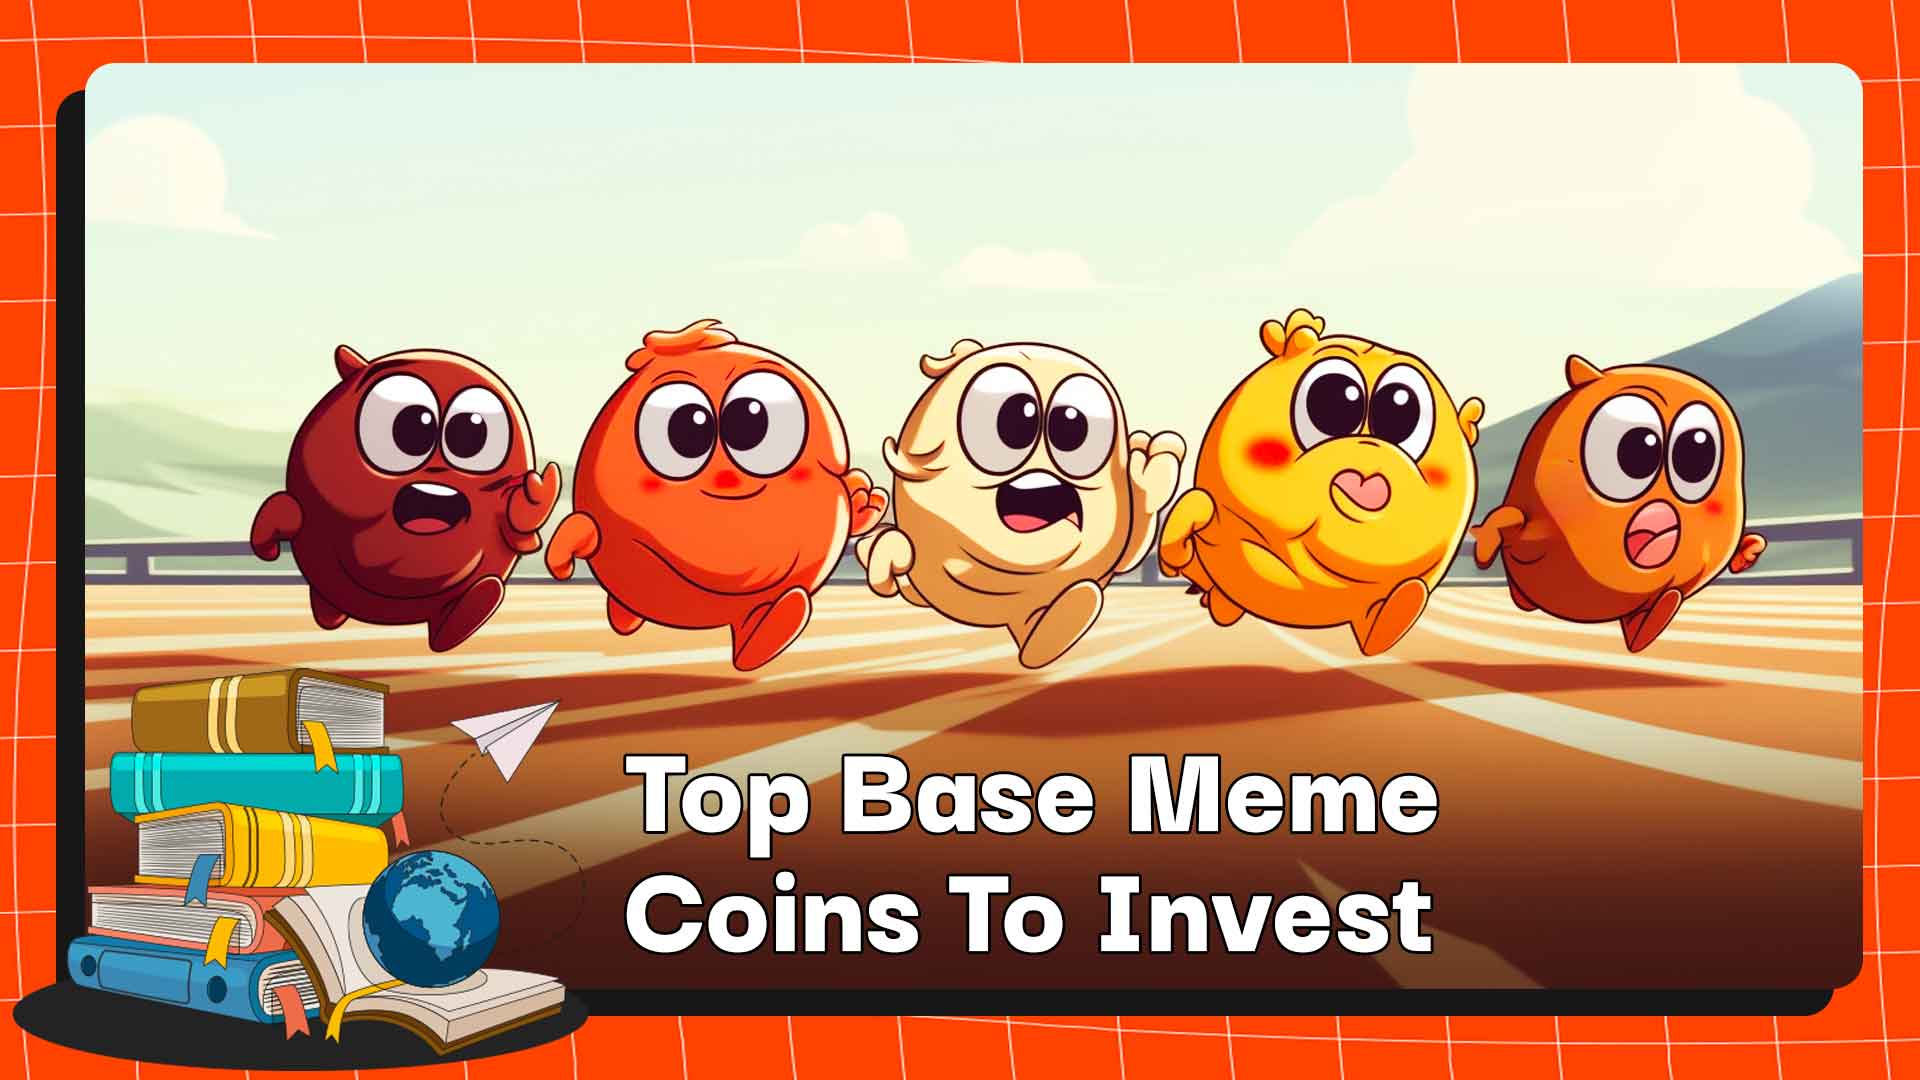 Top Base Meme Coins To Invest